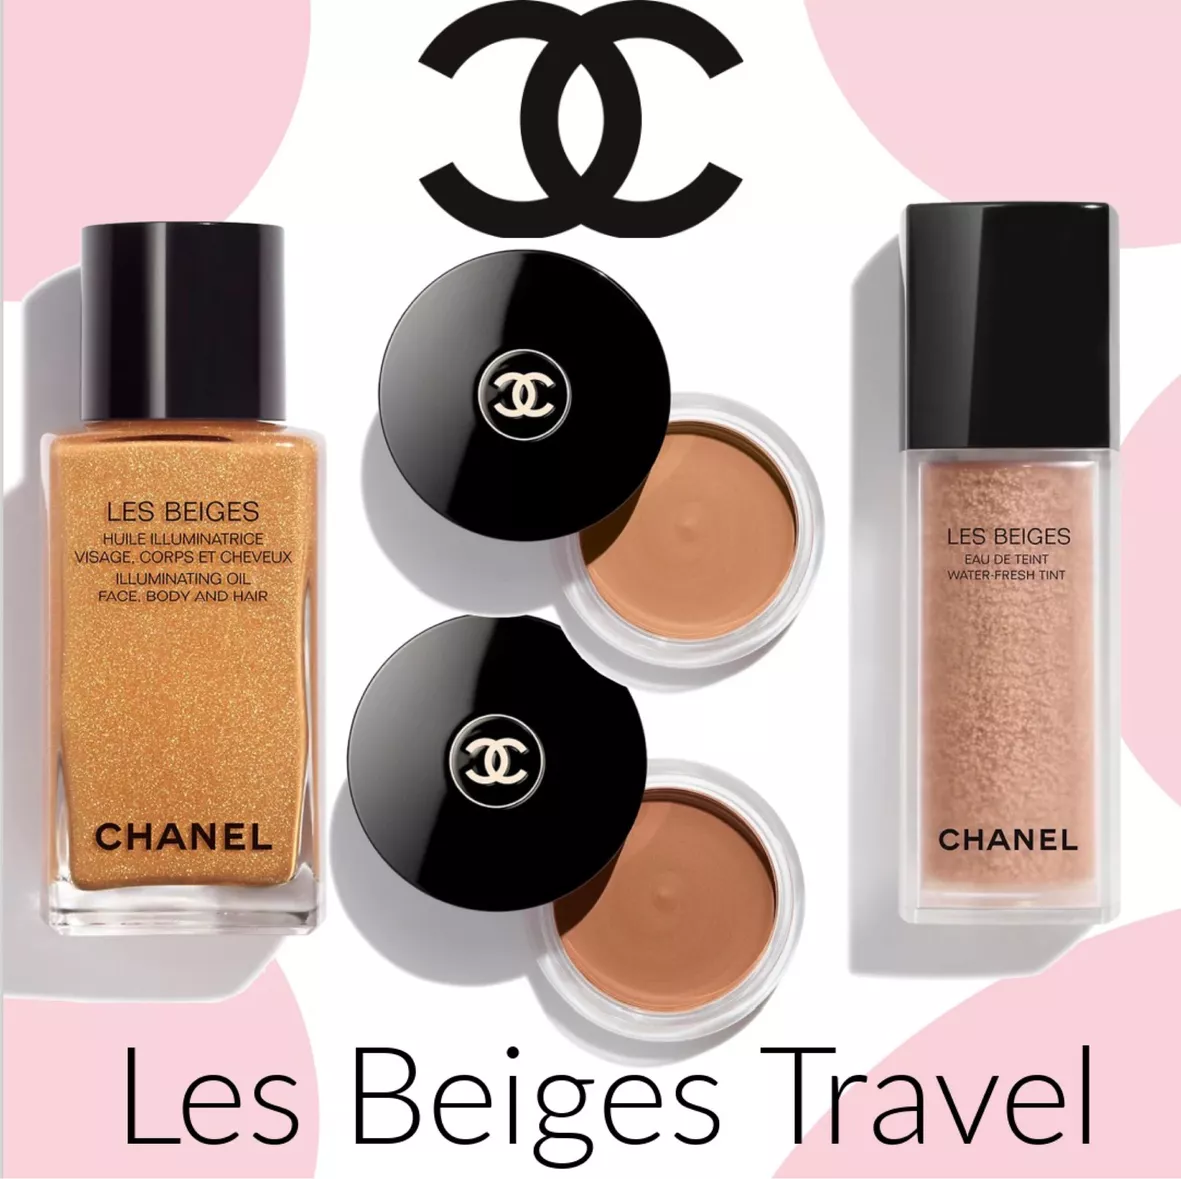 CHANEL LES BEIGES HEALTHY GLOW BRONZING CREAM TRAVEL SIZE - Compare Prices  & Where To Buy 